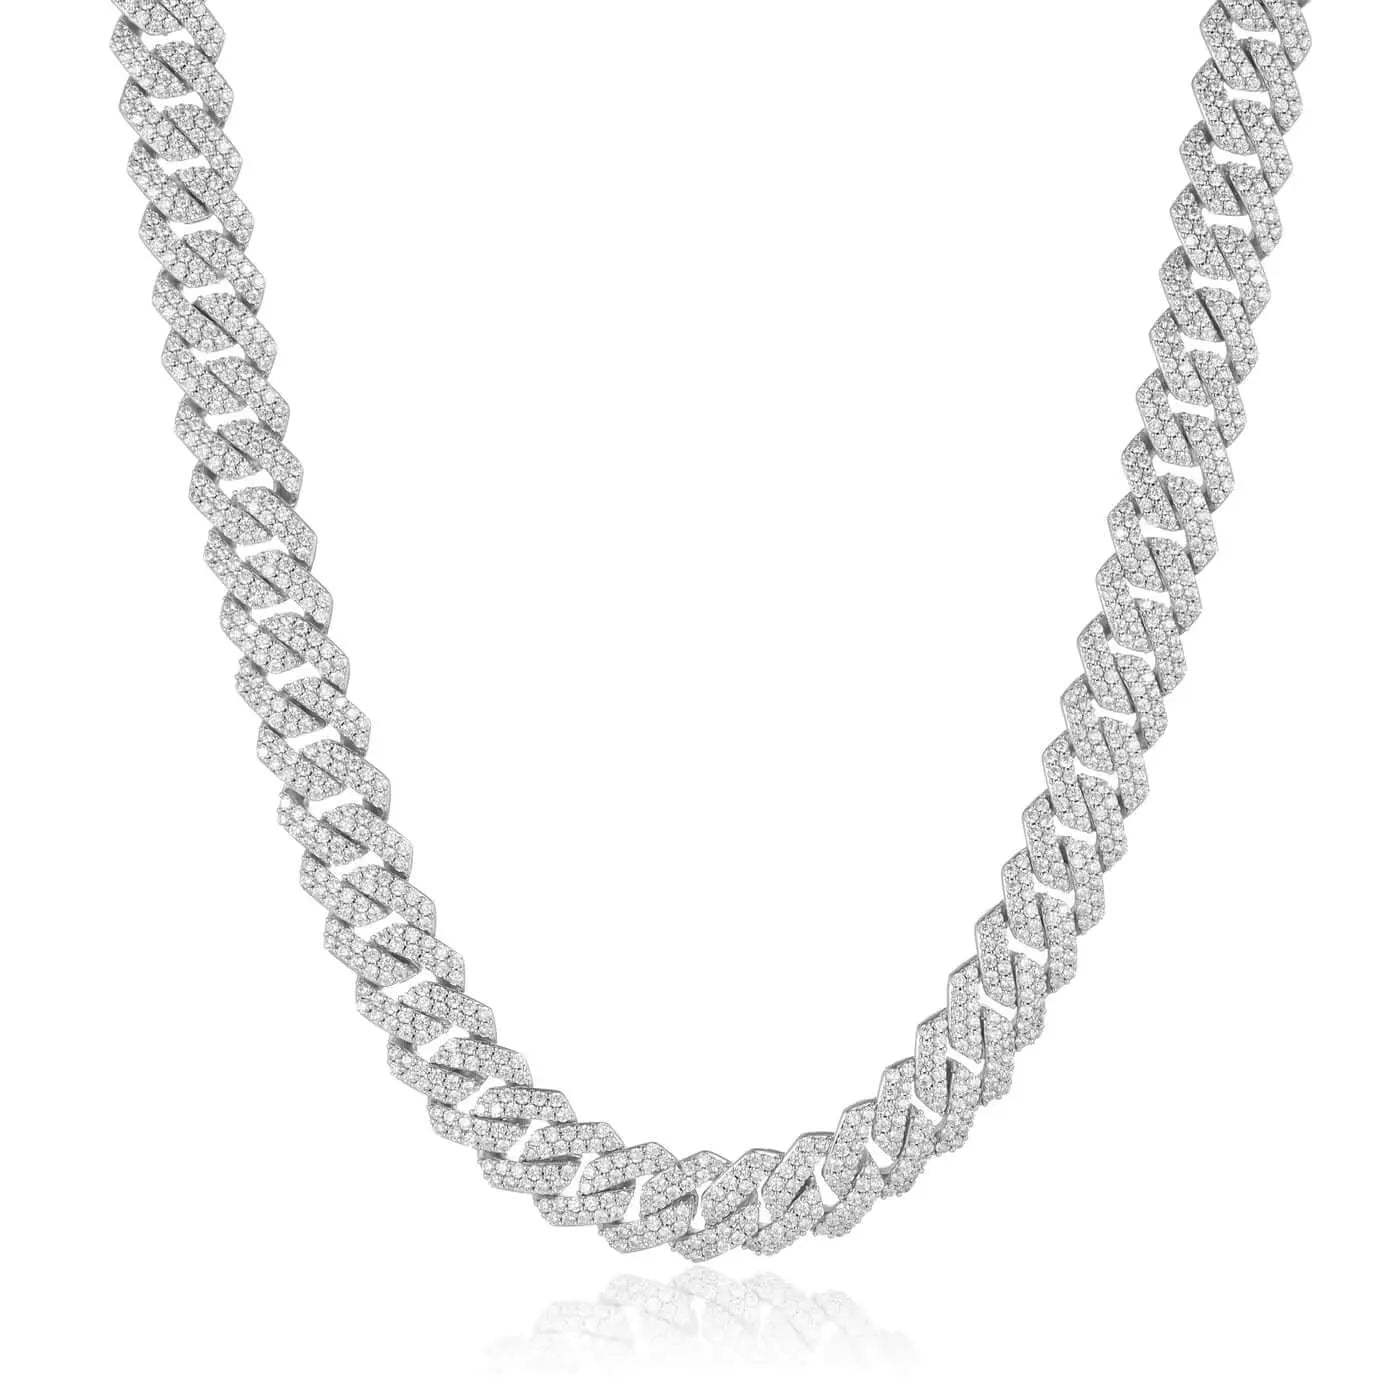  Tyresse 12mm Iced Prong Cuban Necklace - White Gold